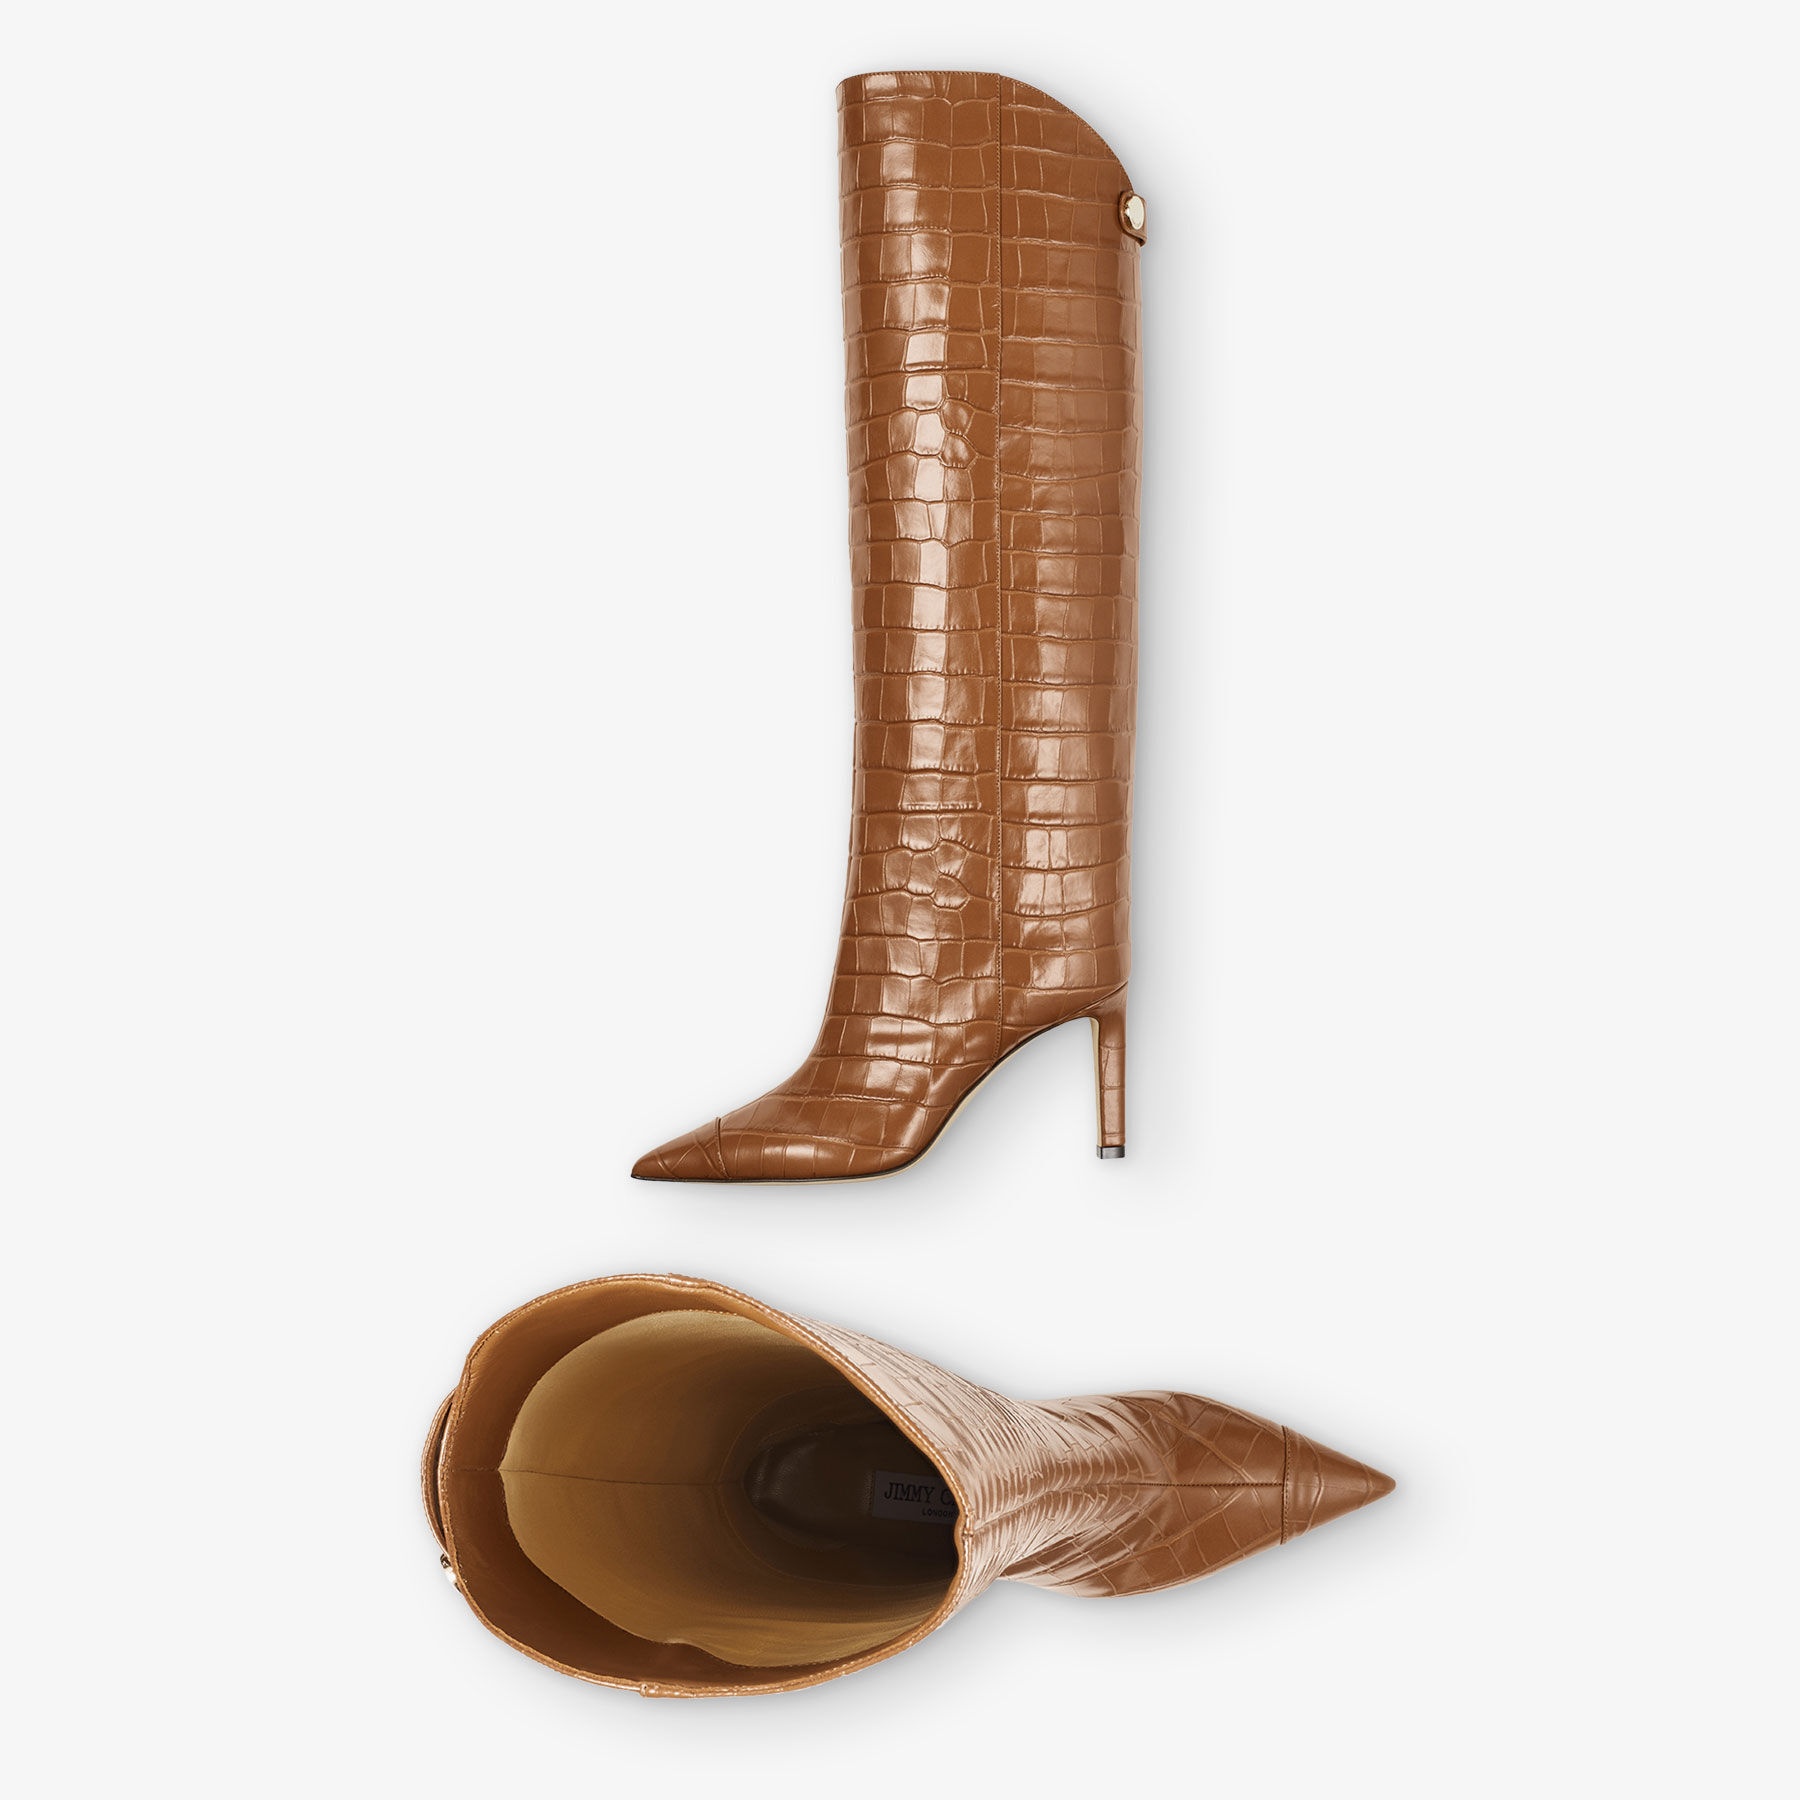 Alizze Knee Boot 85
Tan Croc-Embossed Leather Knee-High Boots - 5